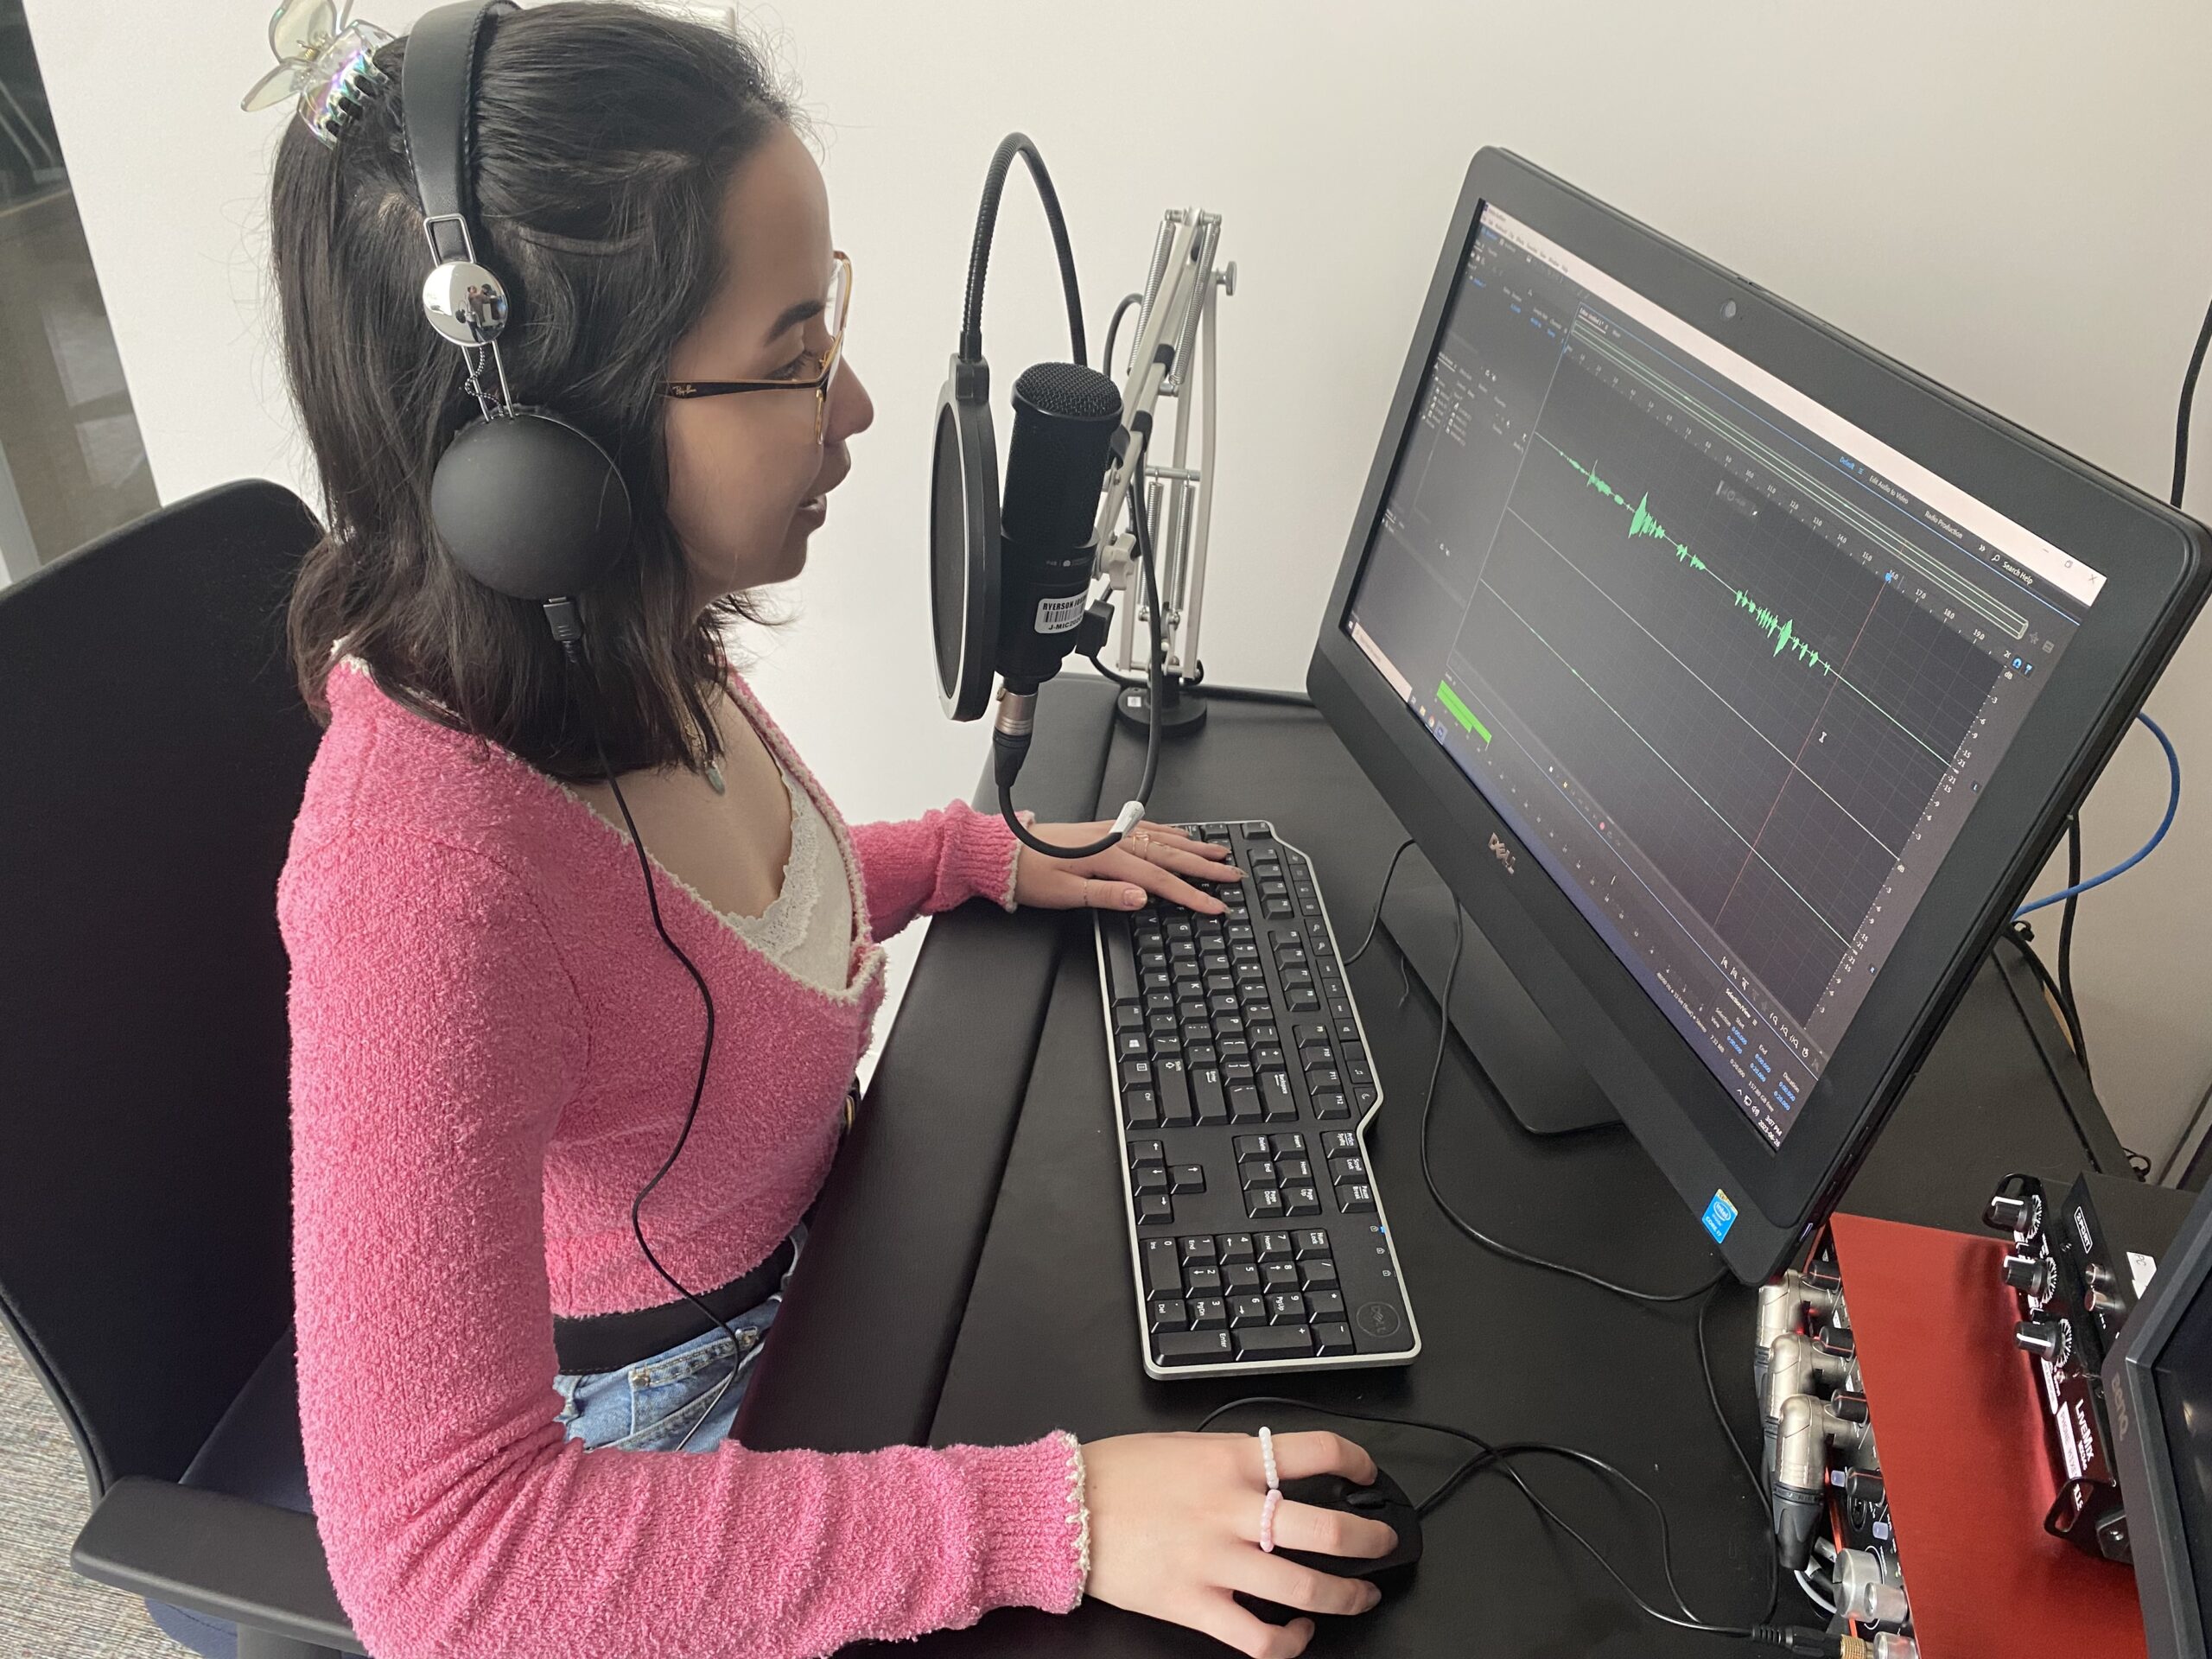 Kendra Seguin wearing headphones recording audio at a computer station.